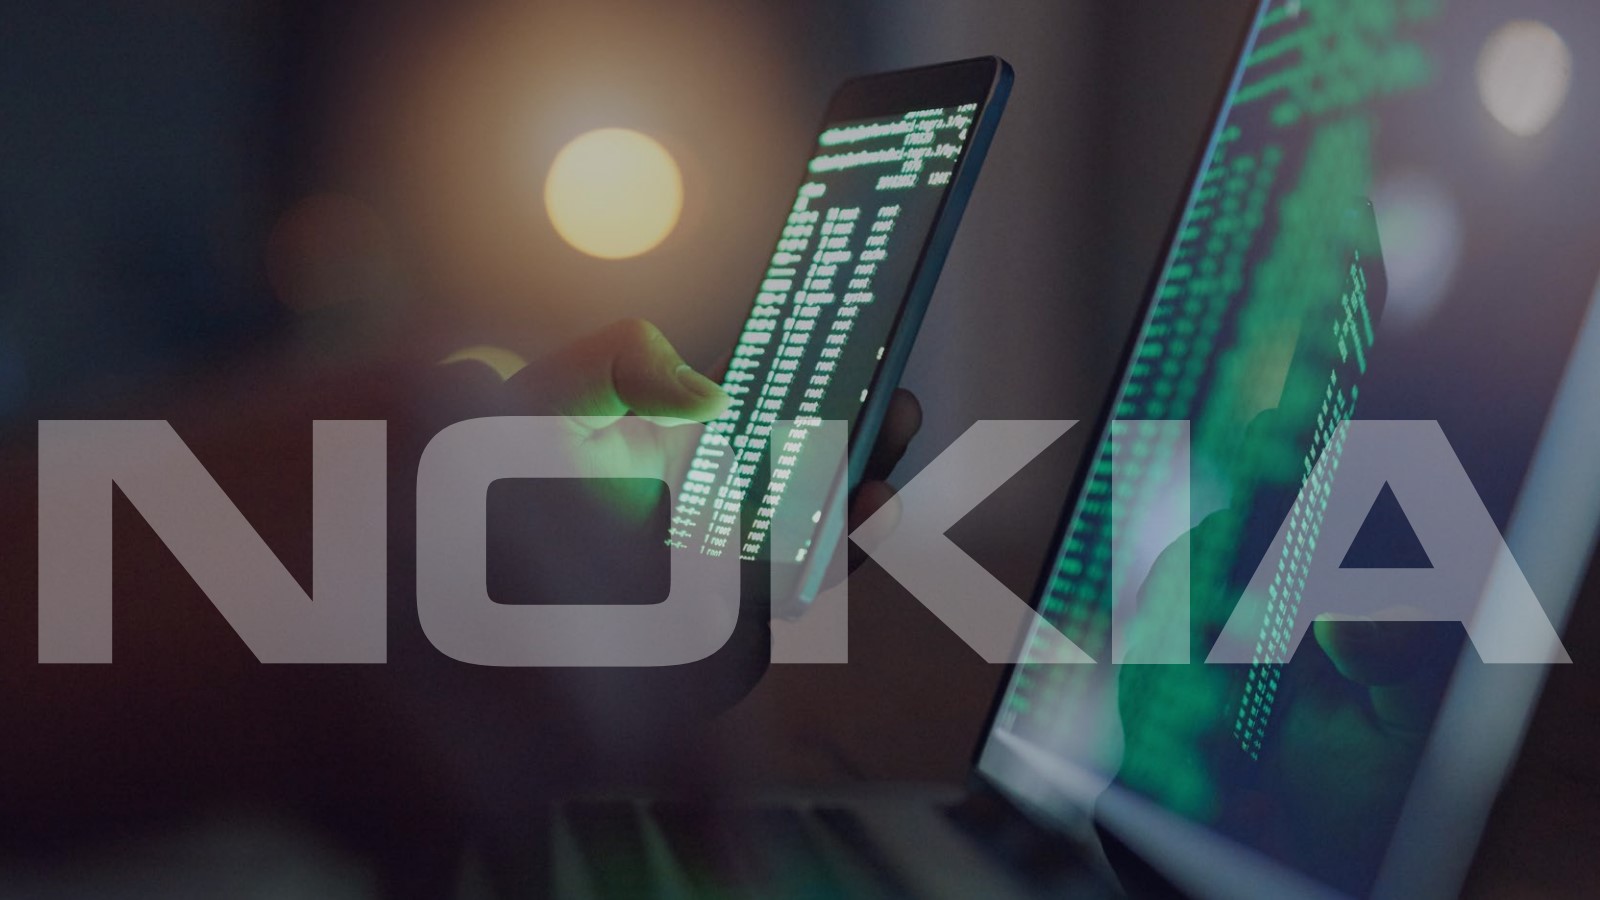 Nokia’s 2020 Report Shows Mobile and IoT Threat Explosion - TechNadu